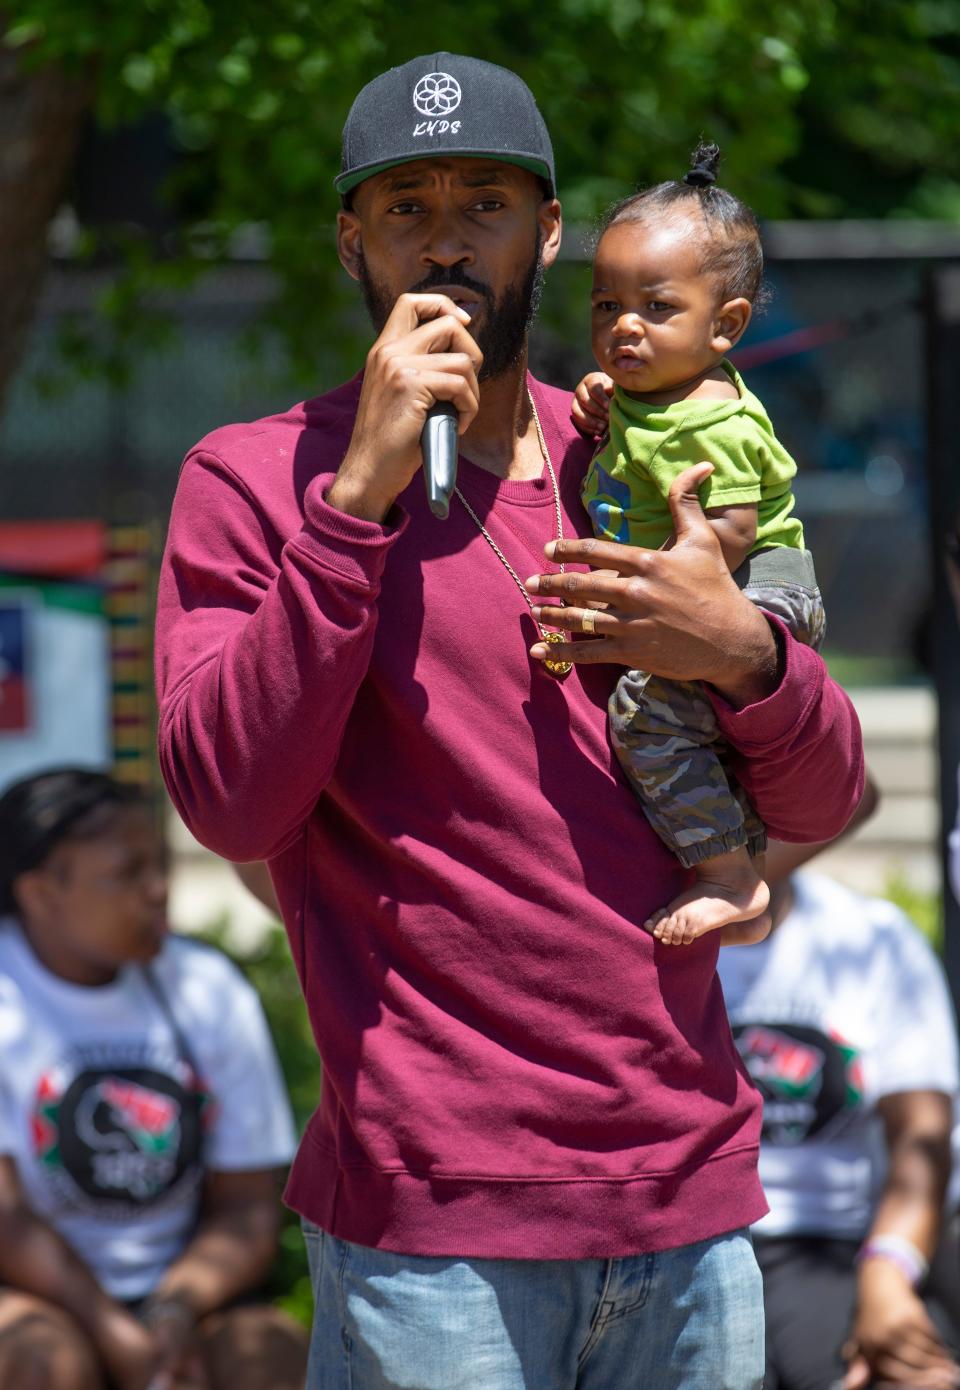 Rodney Saloman of Neptune with his son Ra-sekou, 7 months, talks to the crowd about KYDS, konscious youth development & service. The community comes together at Midtown Commons Park to celebrate the Juneteenth holiday.  Neptune, NJSaturday, June 18, 2022